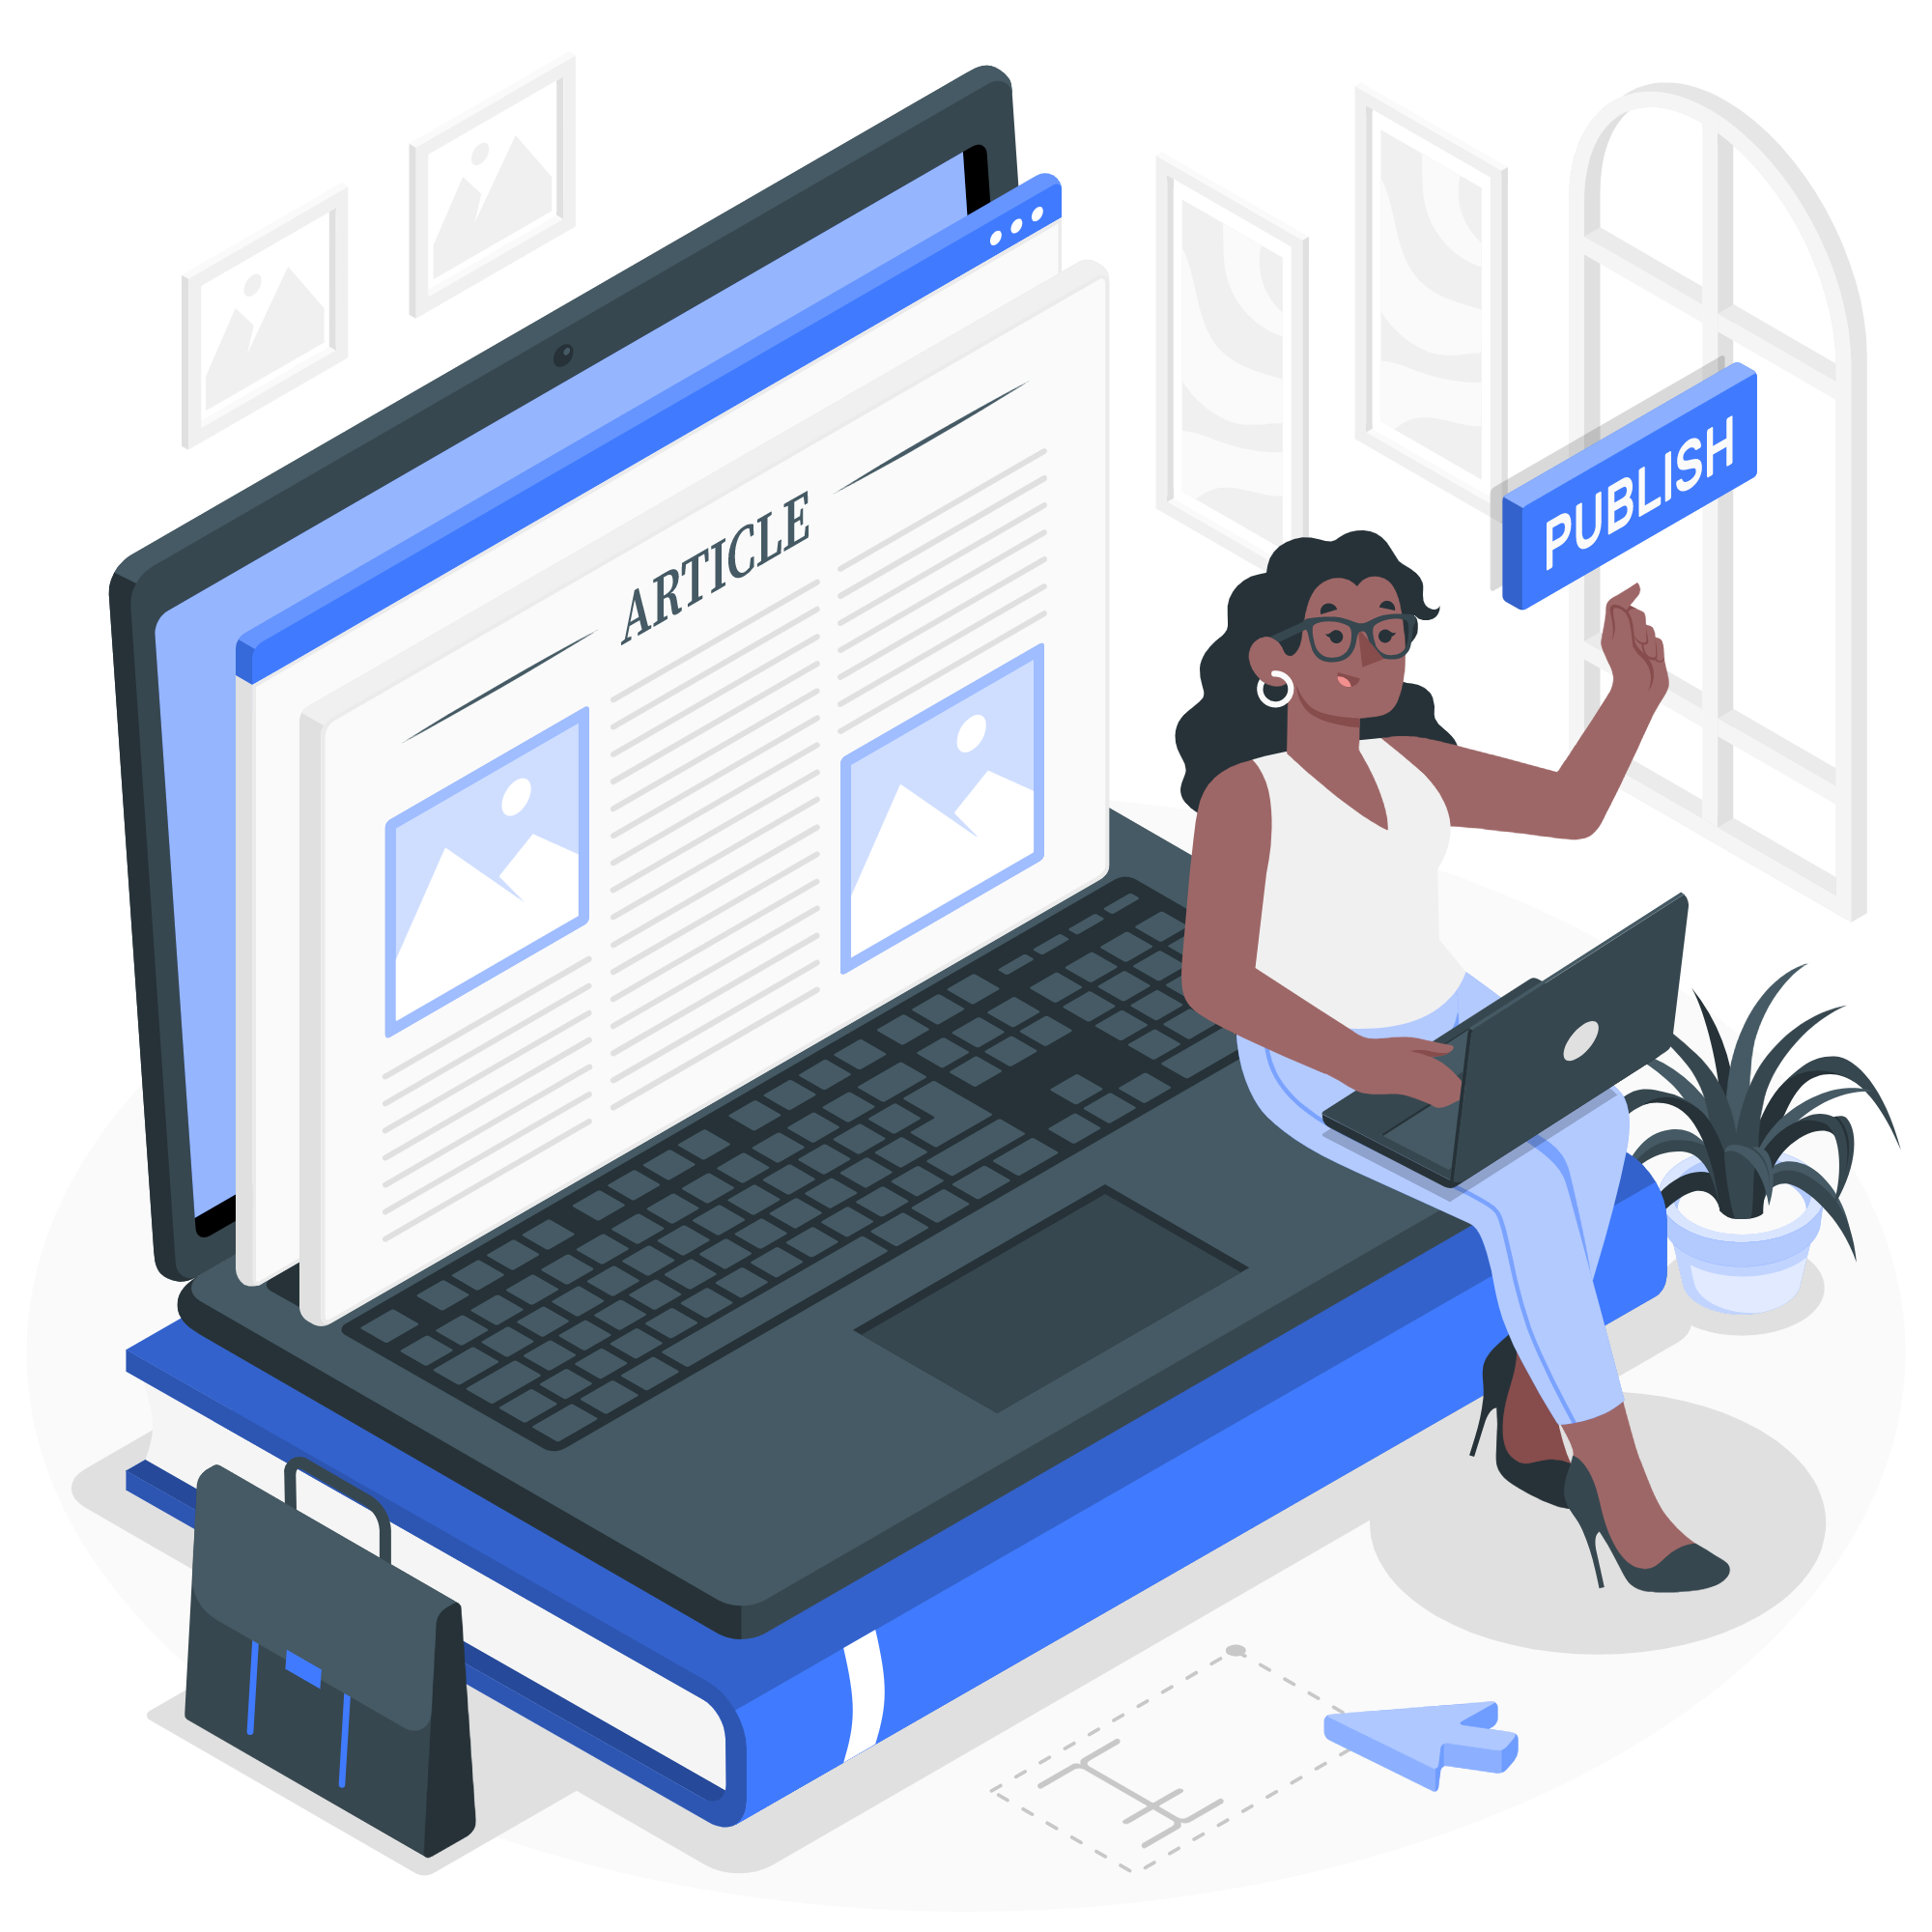 A graphic of a woman sitting on the corner of her laptop. On the screen is an article, and she is about to touch a floating icon marked Publish